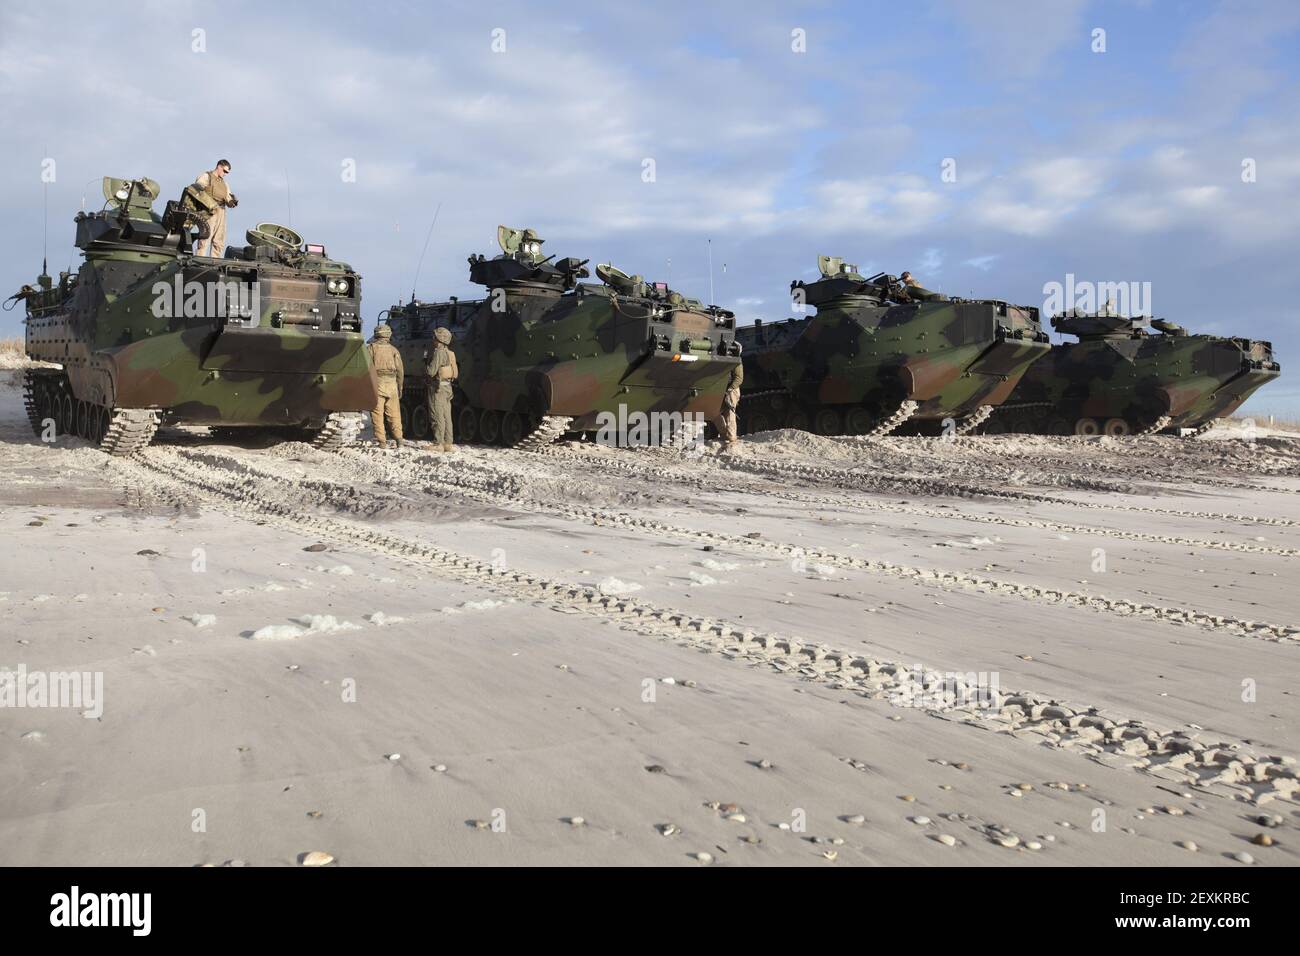 U.S. Marines with Alpha Company, 2nd Assault Amphibious Battalion, 2nd Marine Division, inspect P7A1 assault amphibious vehicles before a training exercise at Onslow Beach, Camp Lejeune, N.C., Jan. 10, 2014. The training exercise was conducted to practice beach raids for future ship to shore operations. (Photo by Lance Cpl. Christopher Mendoza, U.S. Marine Corps/DoD/Sipa USA) Stock Photo